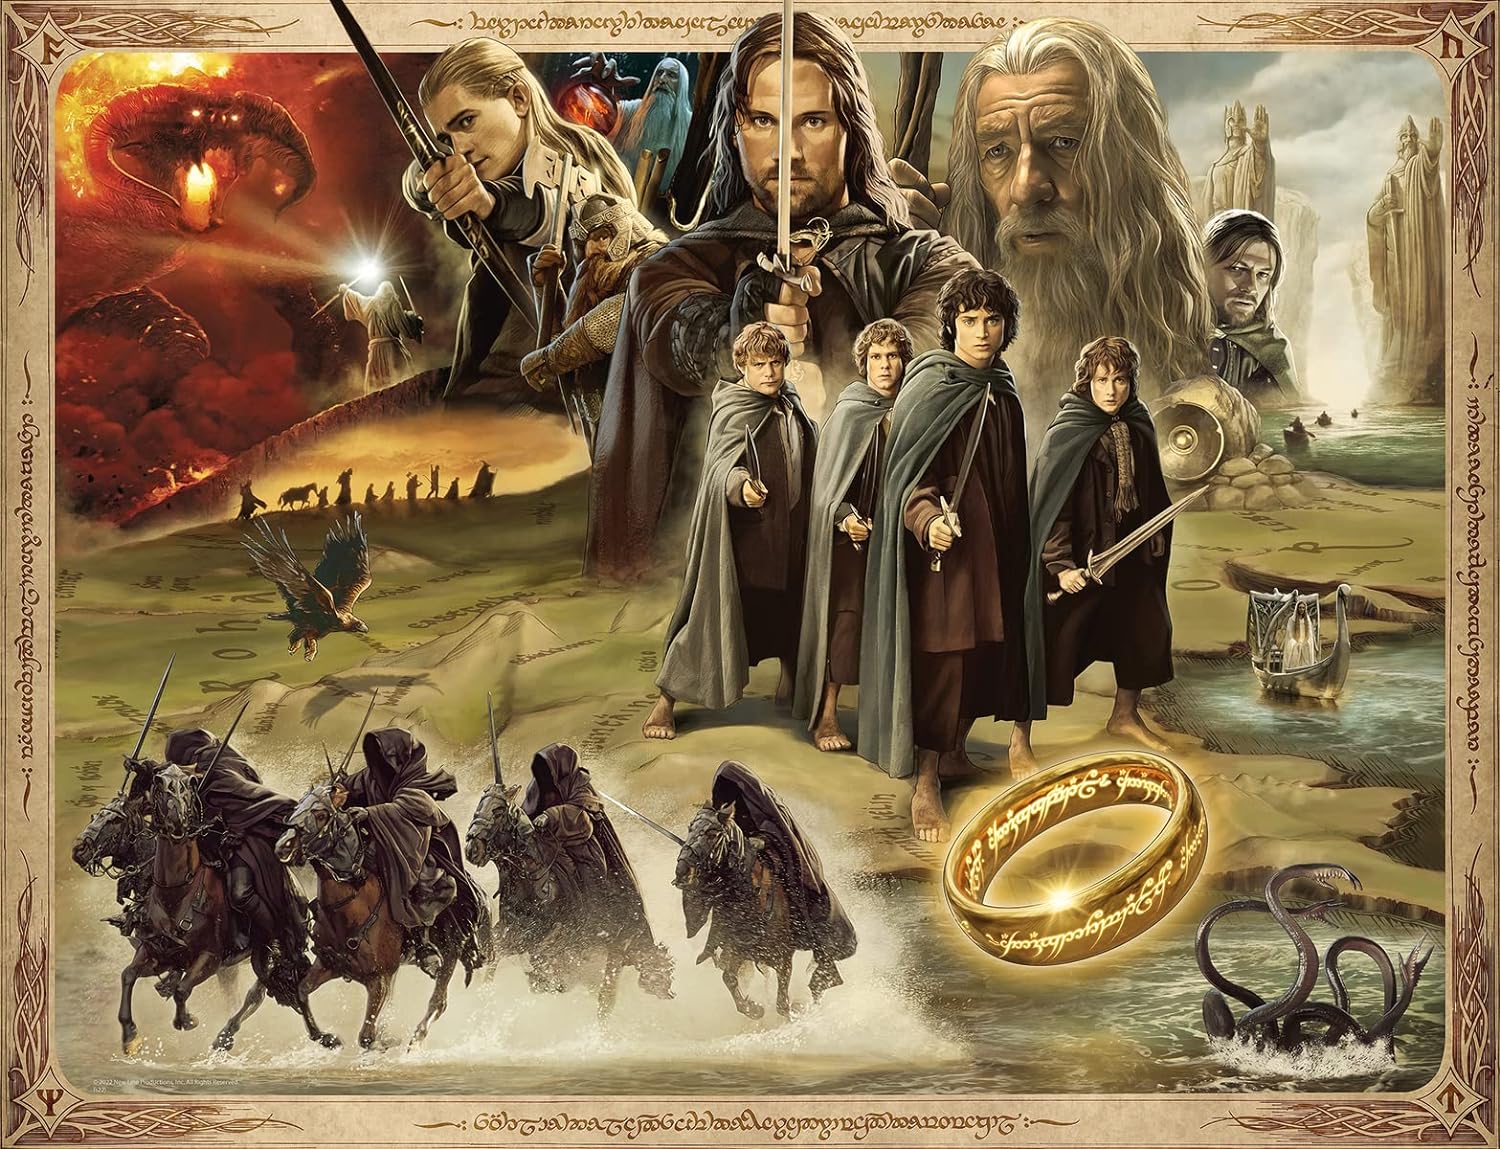  Lord of the Rings 2000